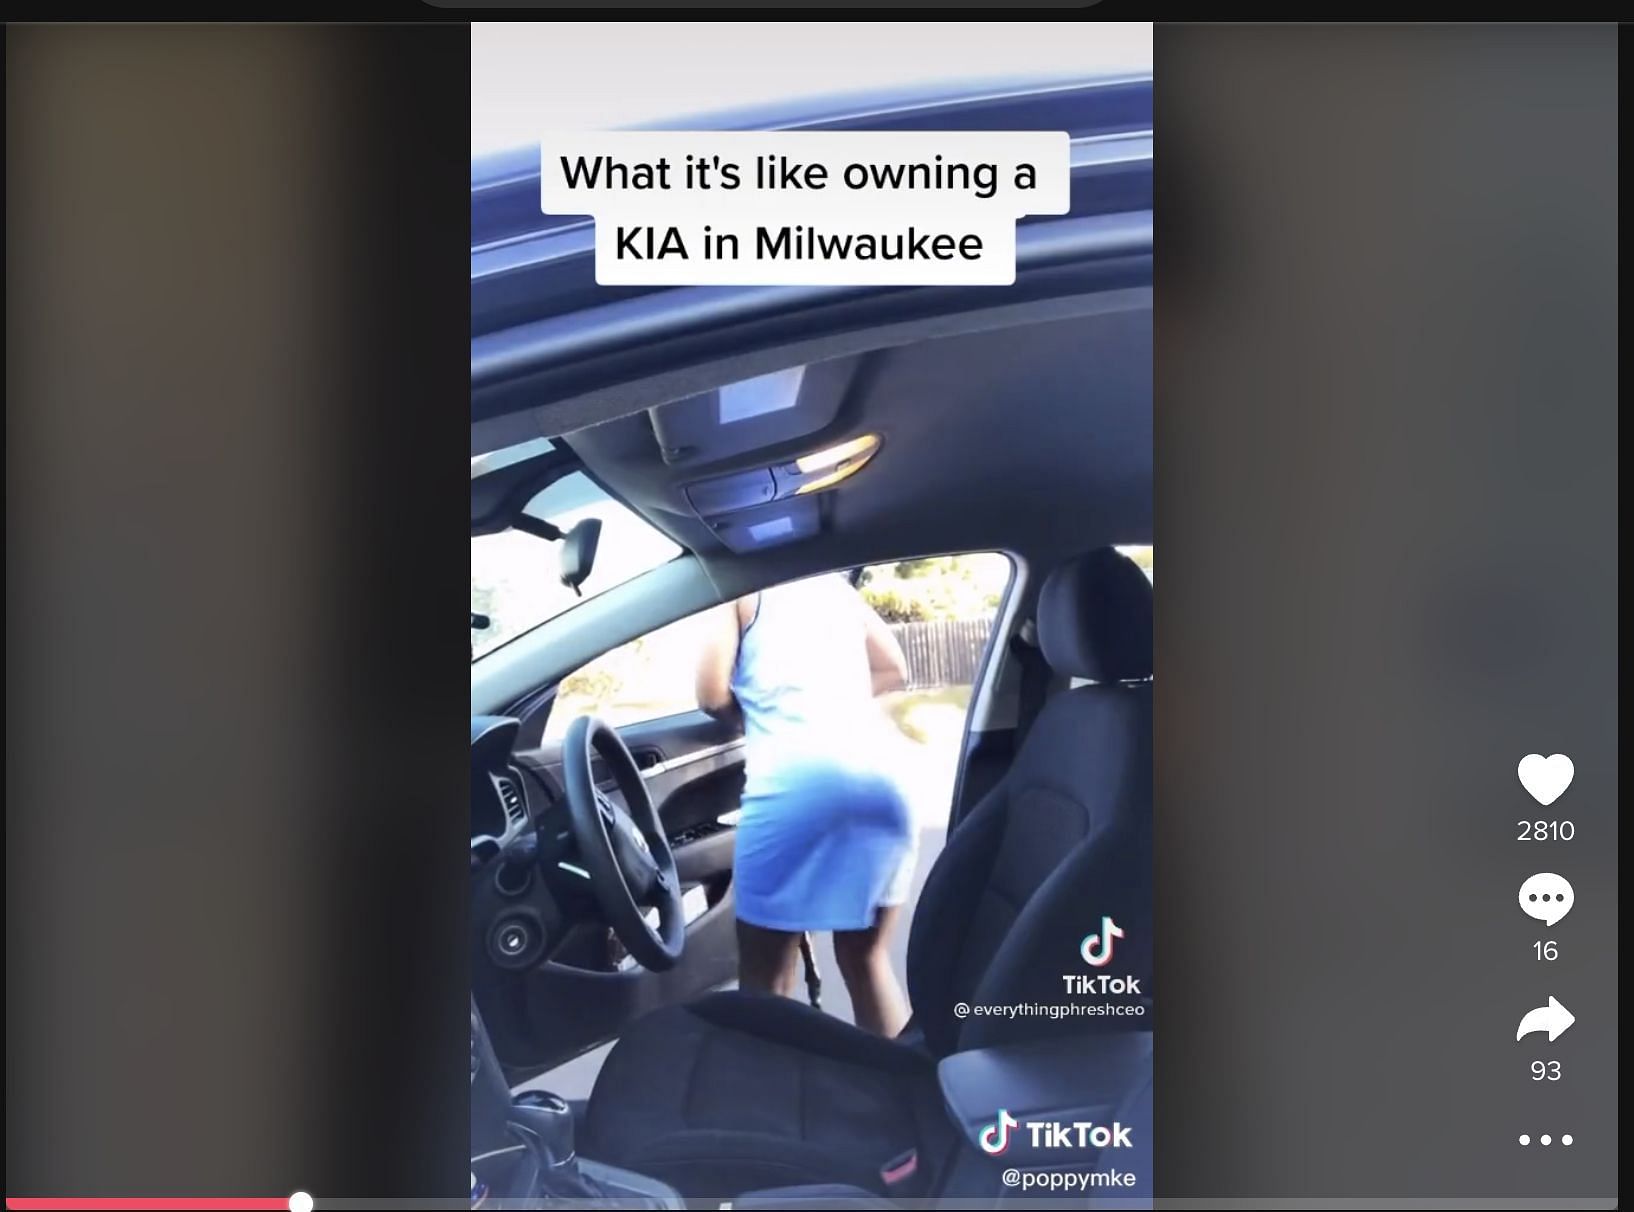 The Kia Boys trend, which is making people steal cars by hacking them is creating a panic-like situation for police in various states of the country. (image via TikTok)